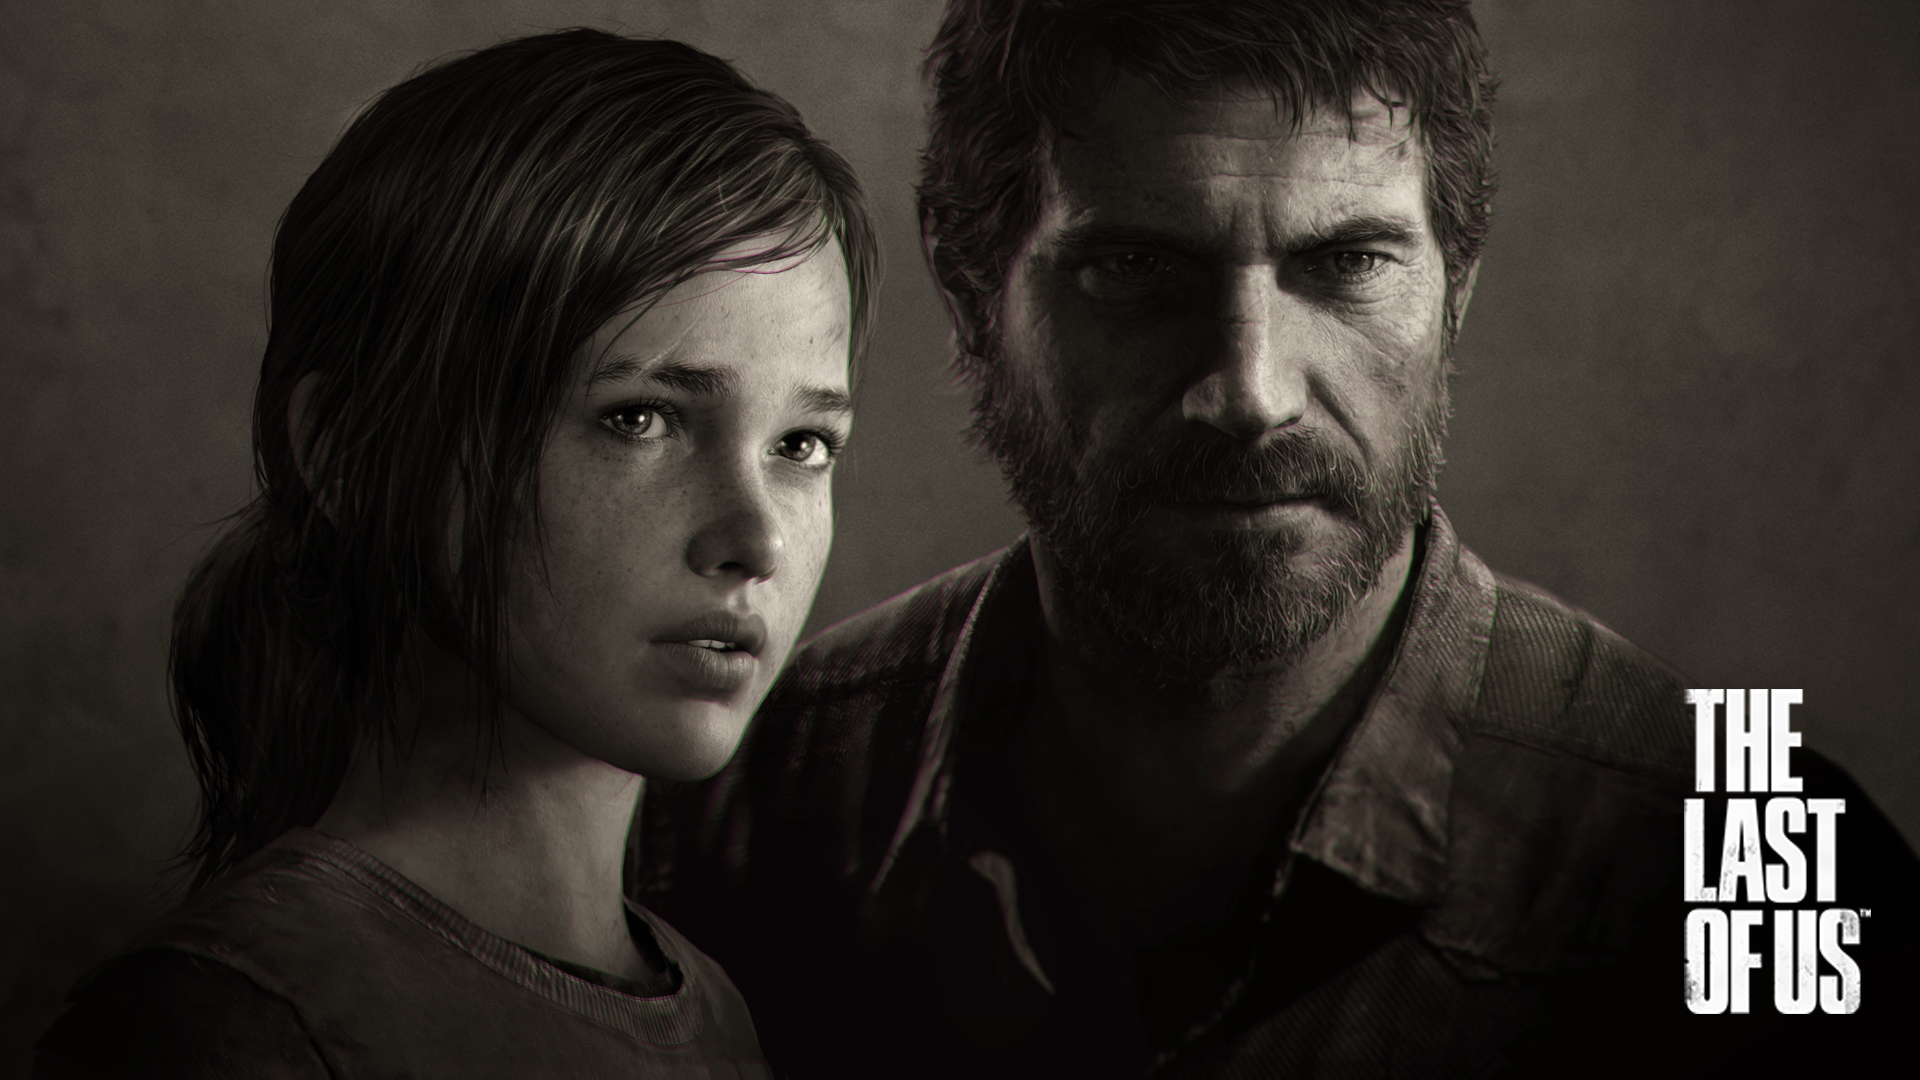 The Last of Us Wallpaper HD Page 4